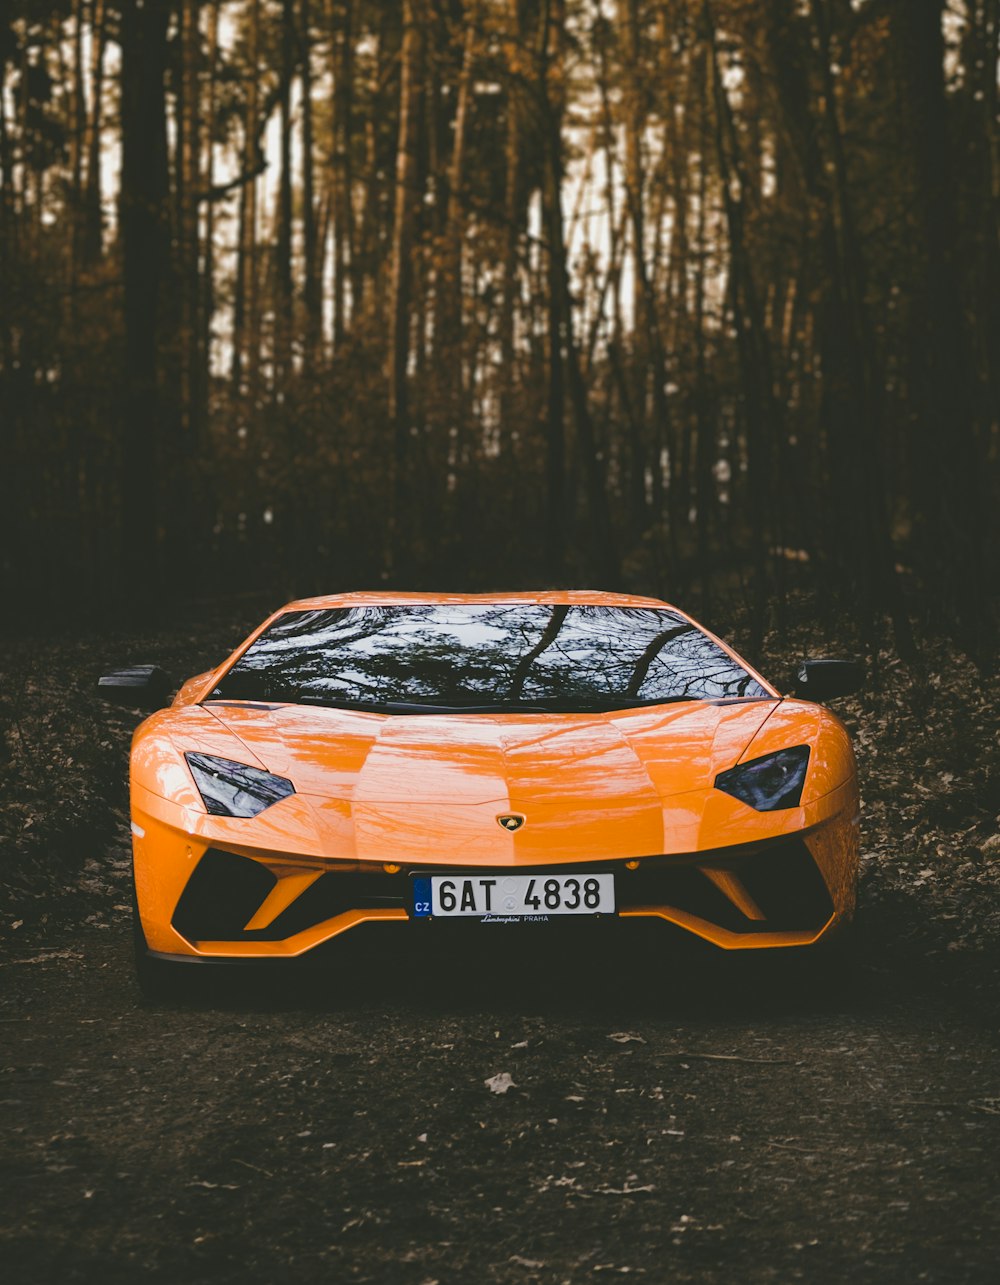 100 Cars Pictures Download Free Images On Unsplash